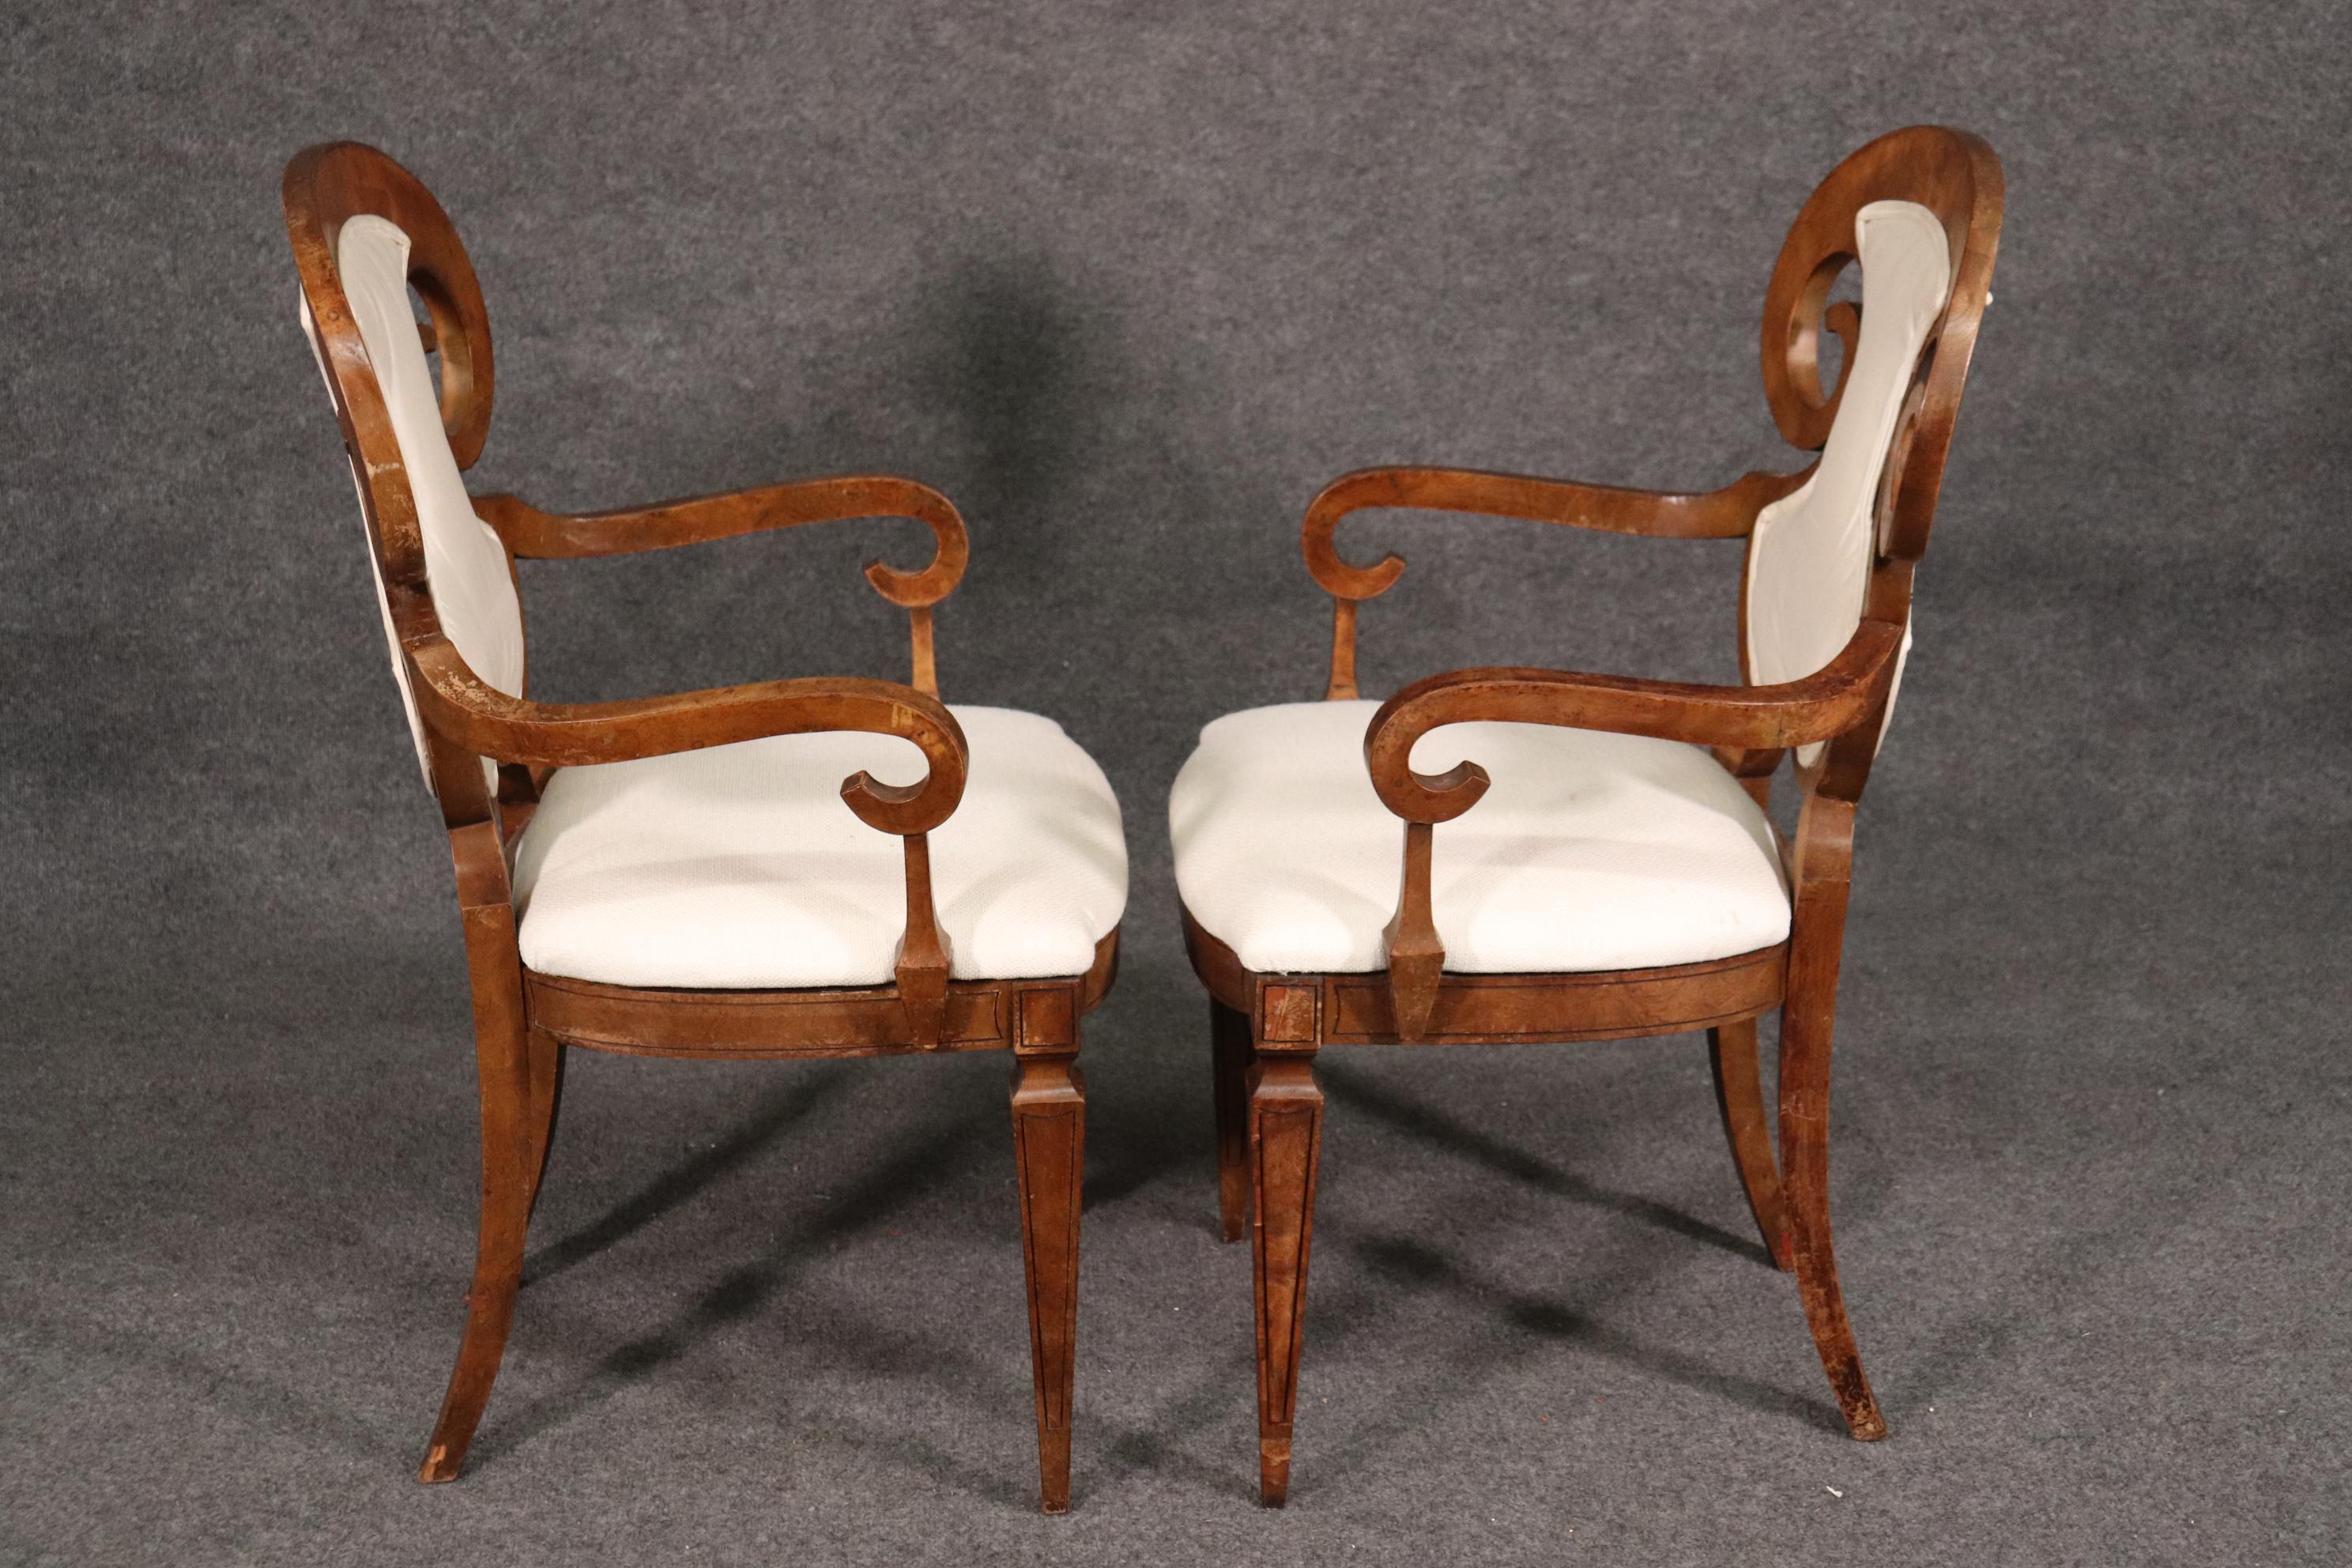 This is a gorgeous set of 6 William Doezema for Mastercraft Biedermeier style chairs. The chairs are in good used condition and will show signs of use and perhaps minor stains that don't show in the photos because they are so minor. The chairs